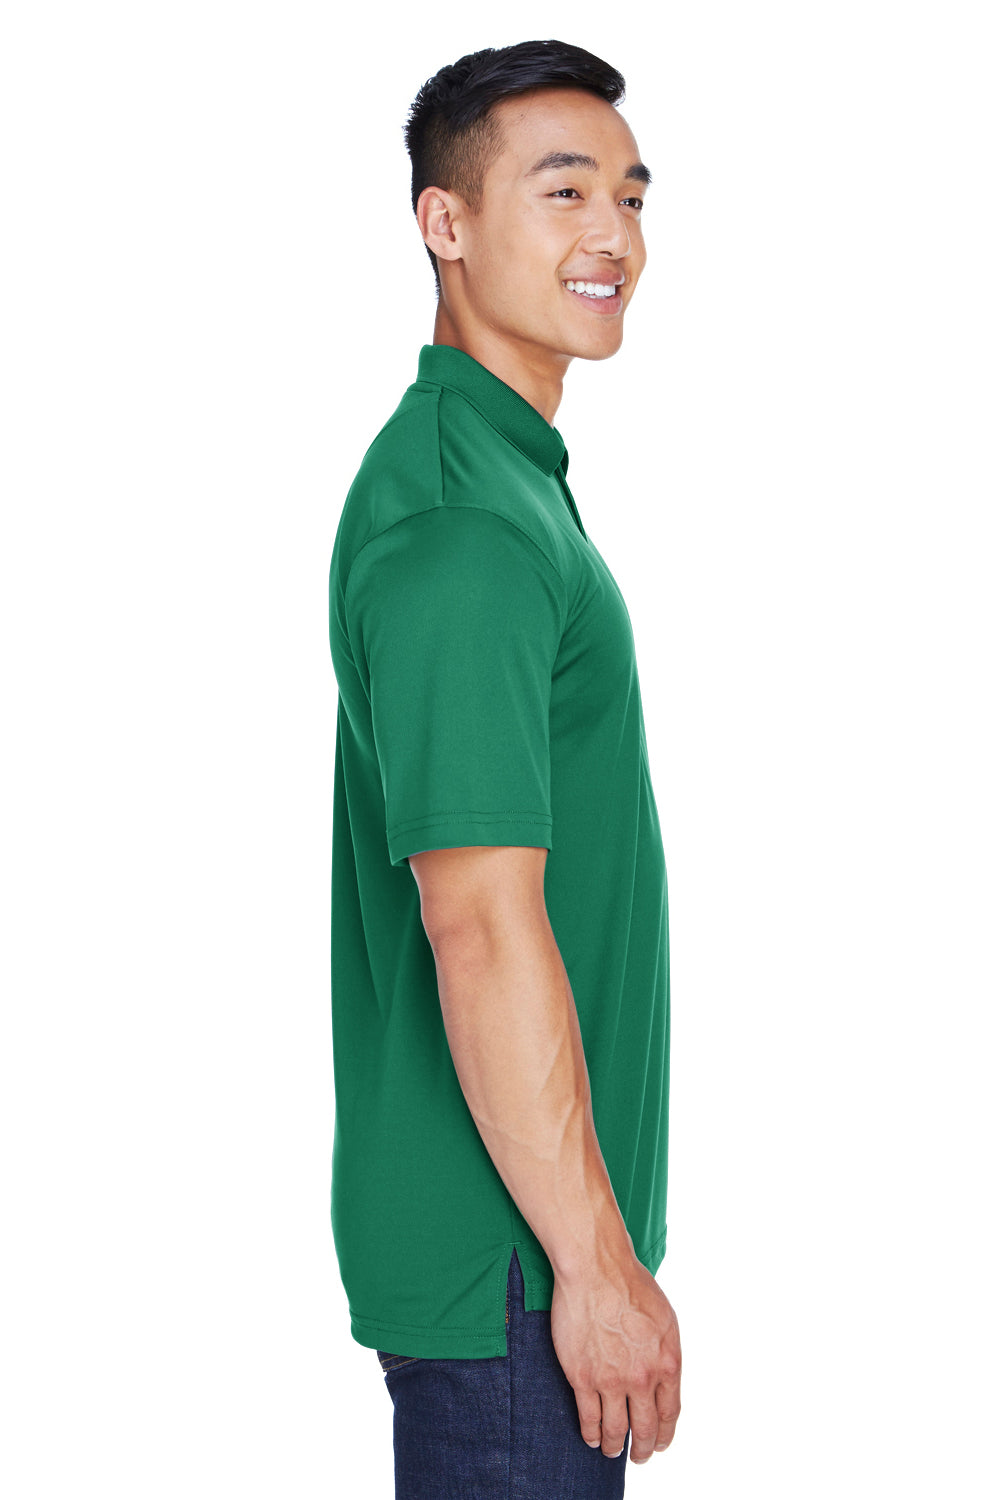 UltraClub 8405 Mens Cool & Dry Moisture Wicking Short Sleeve Polo Shirt Forest Green Side